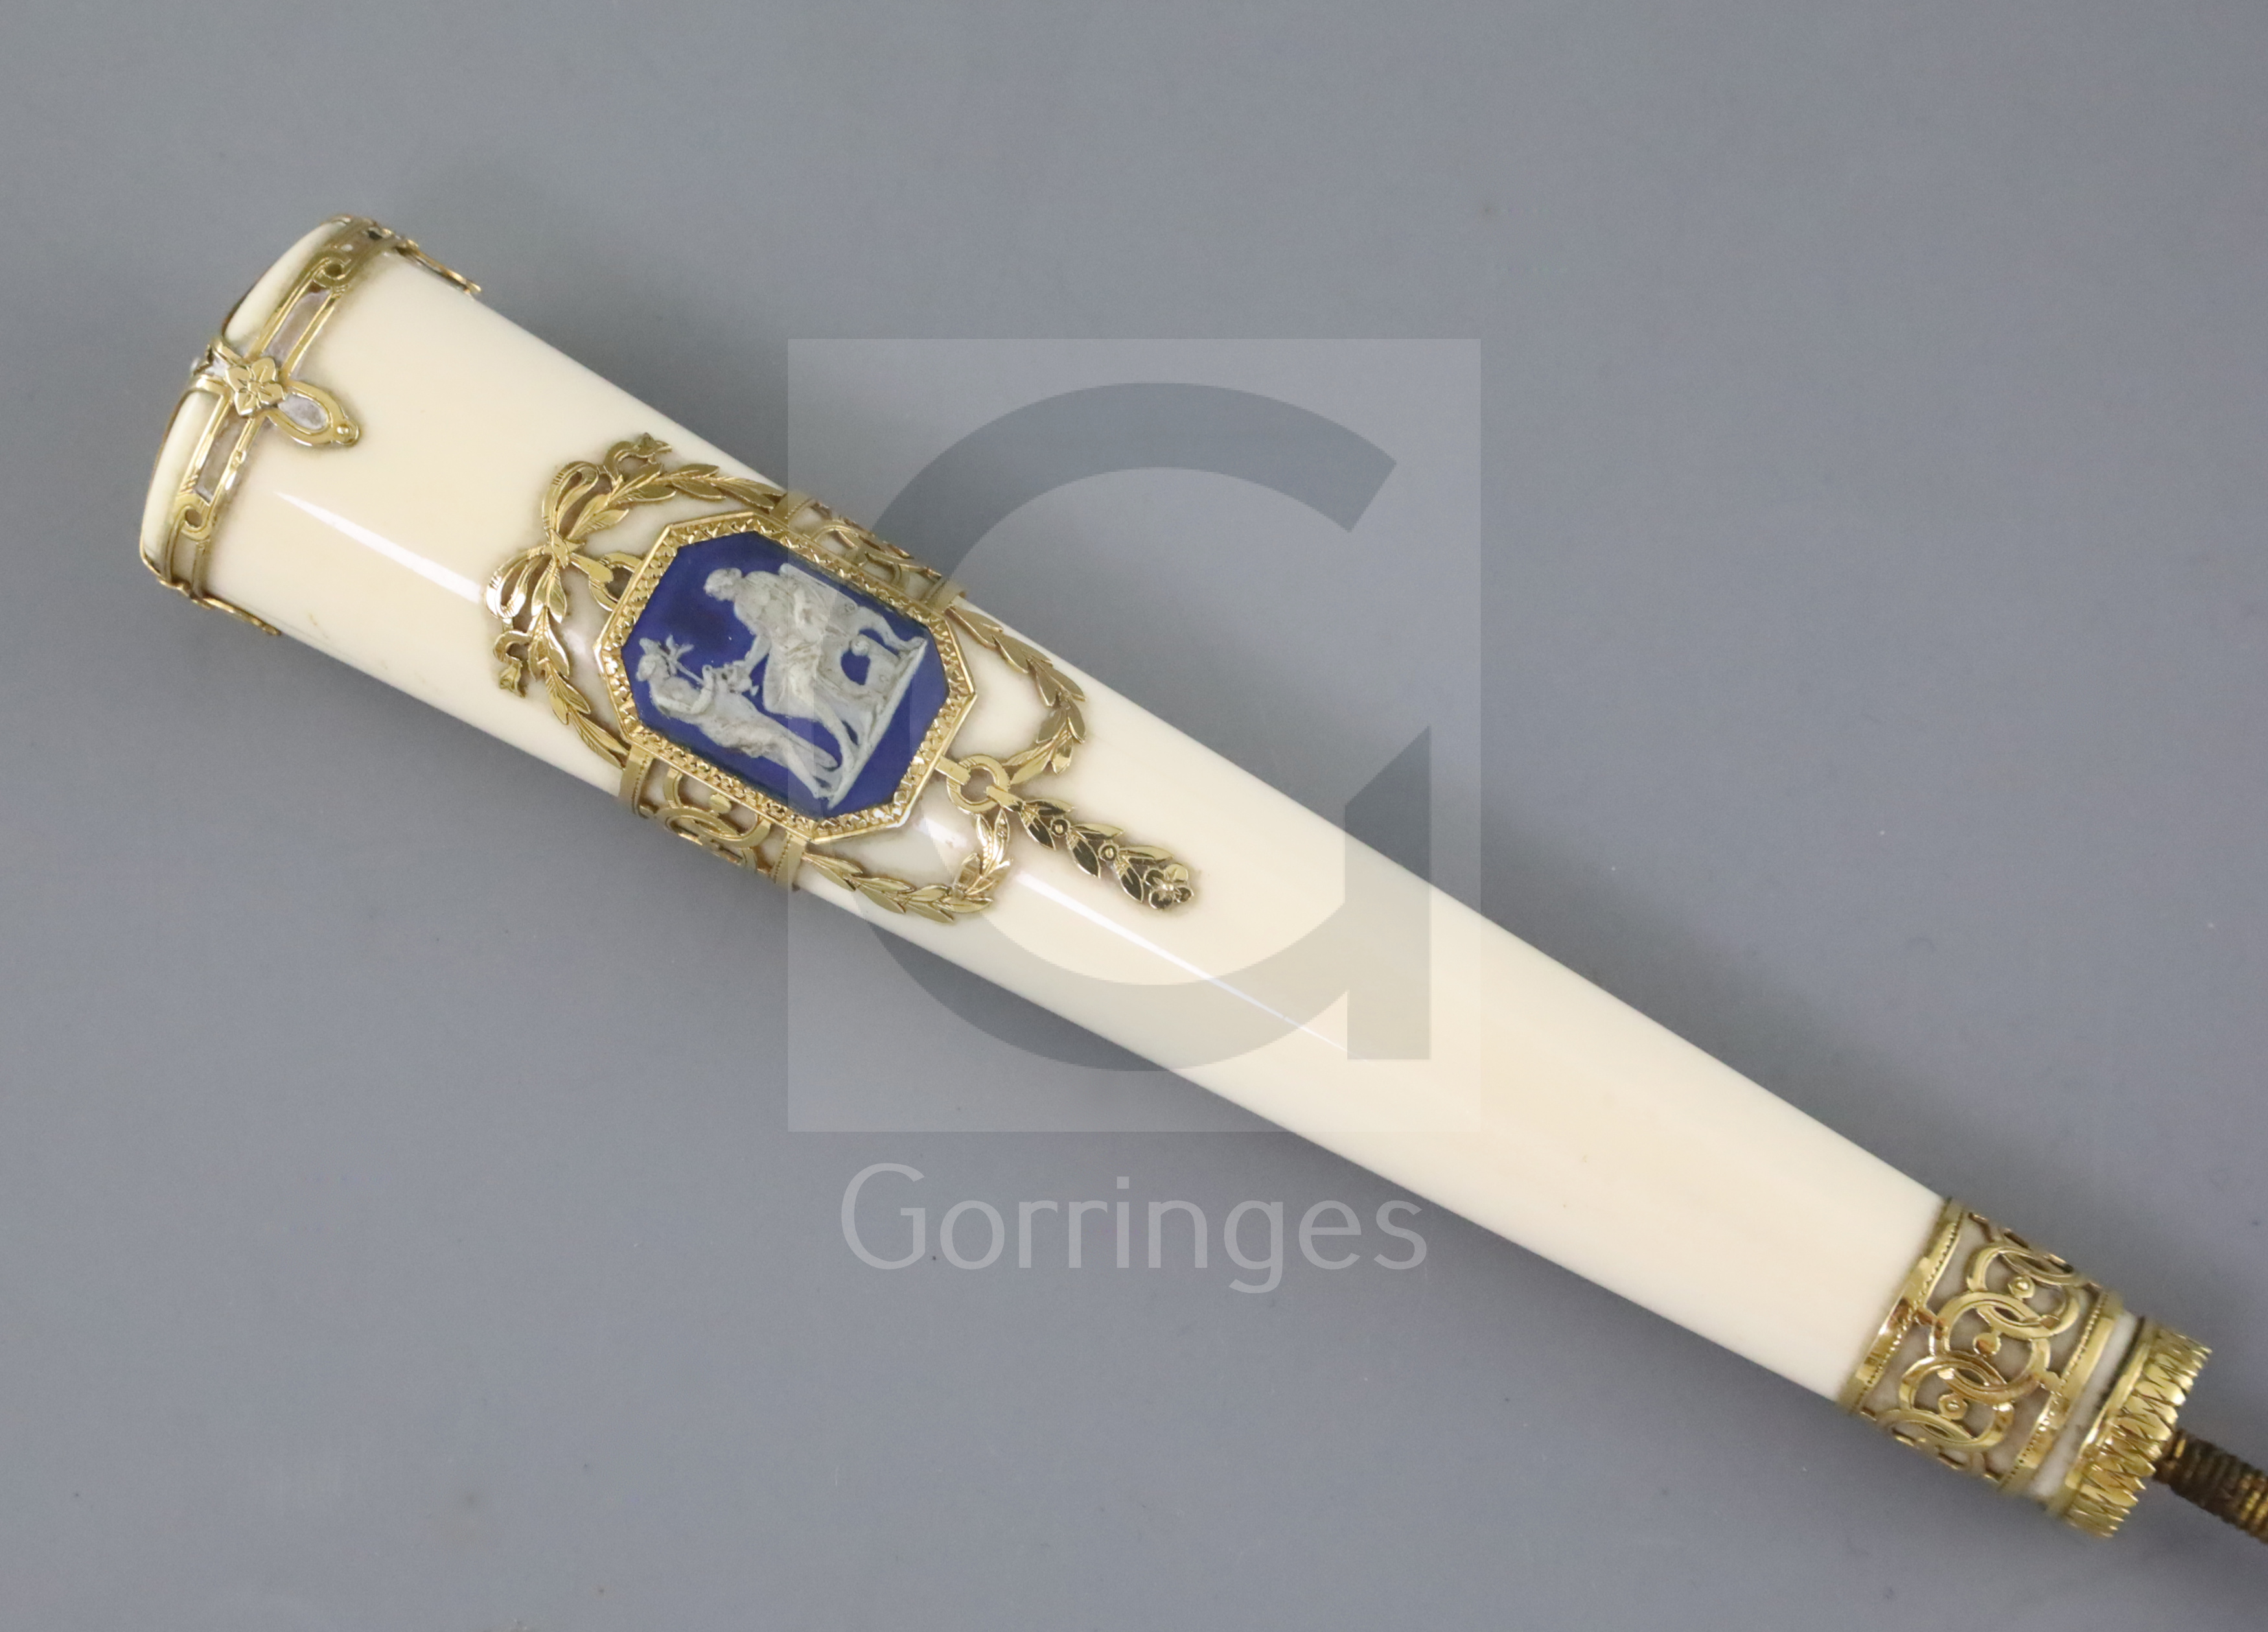 A Swiss gold-mounted ivory parasol handle, inset with a blue jasper plaque of classical figures - Image 3 of 3